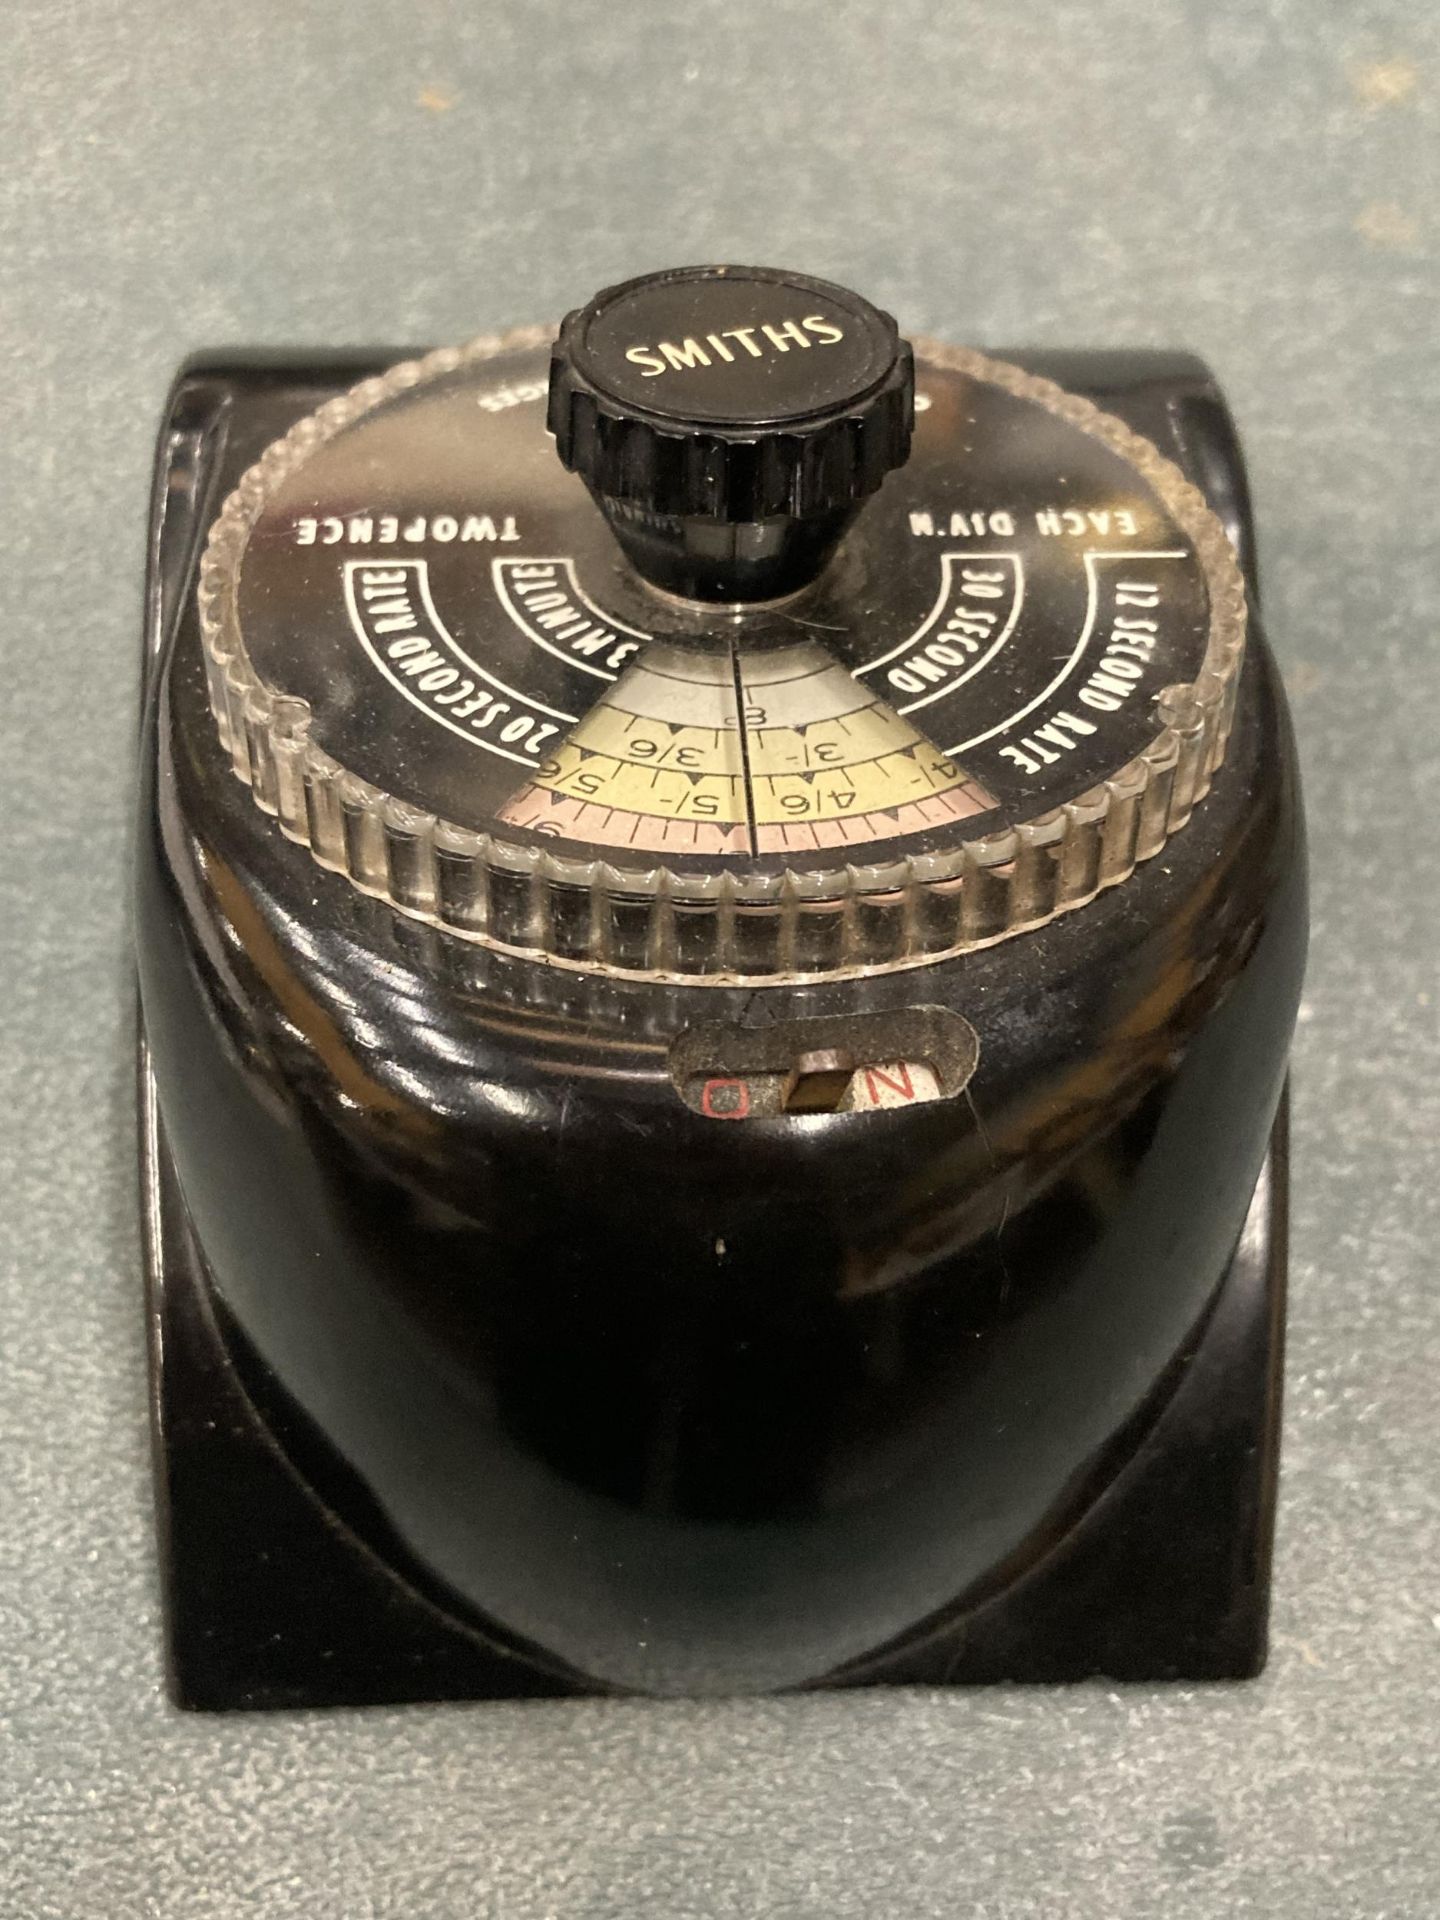 A COLLECTABLE BAKELITE SMITHS ELECTRIC CALCULATOR - Image 3 of 4